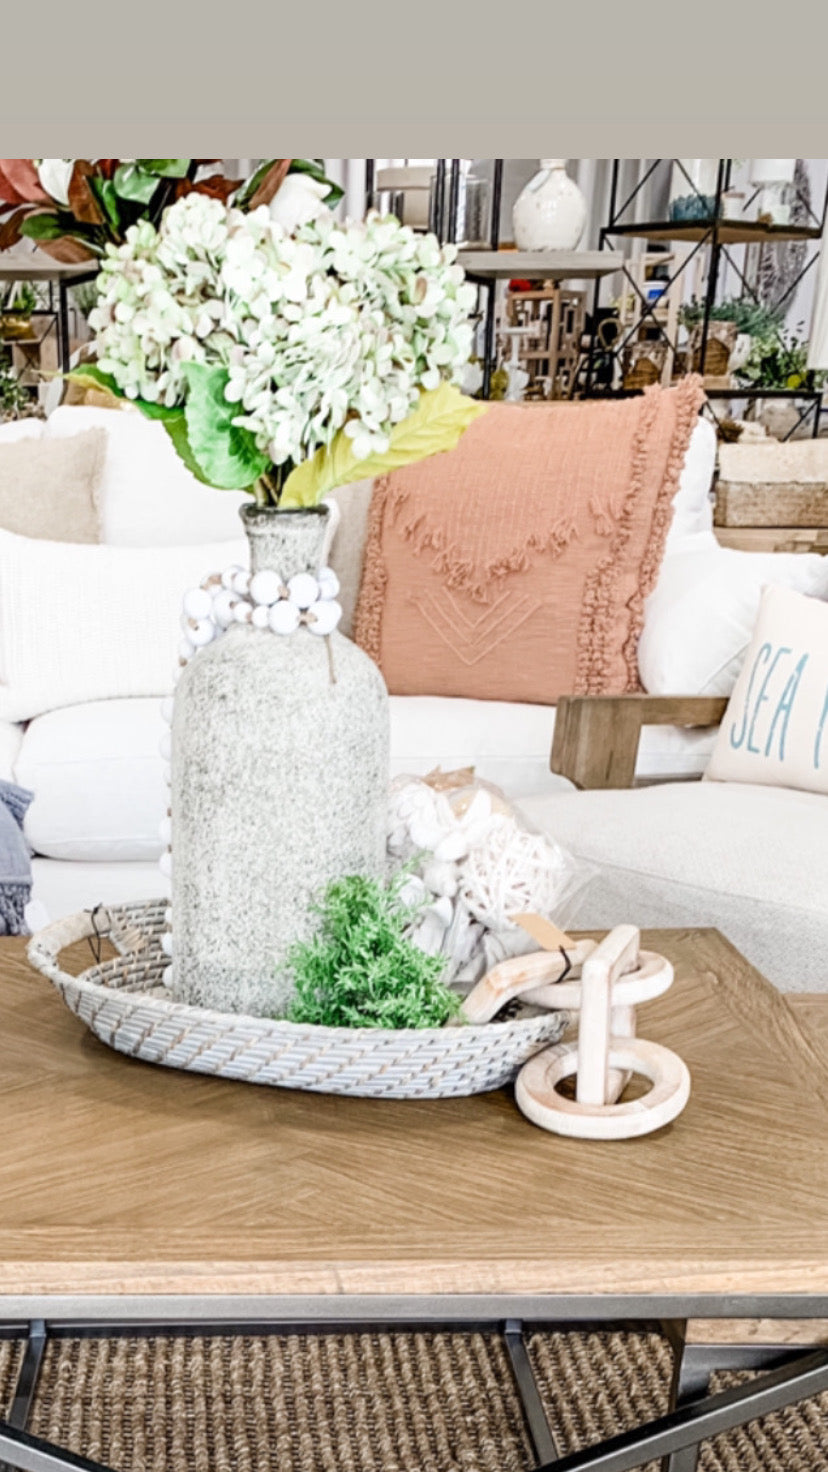 5 Steps to Cozy: Bringing Warmth and Comfort to Your Home with Designer Products